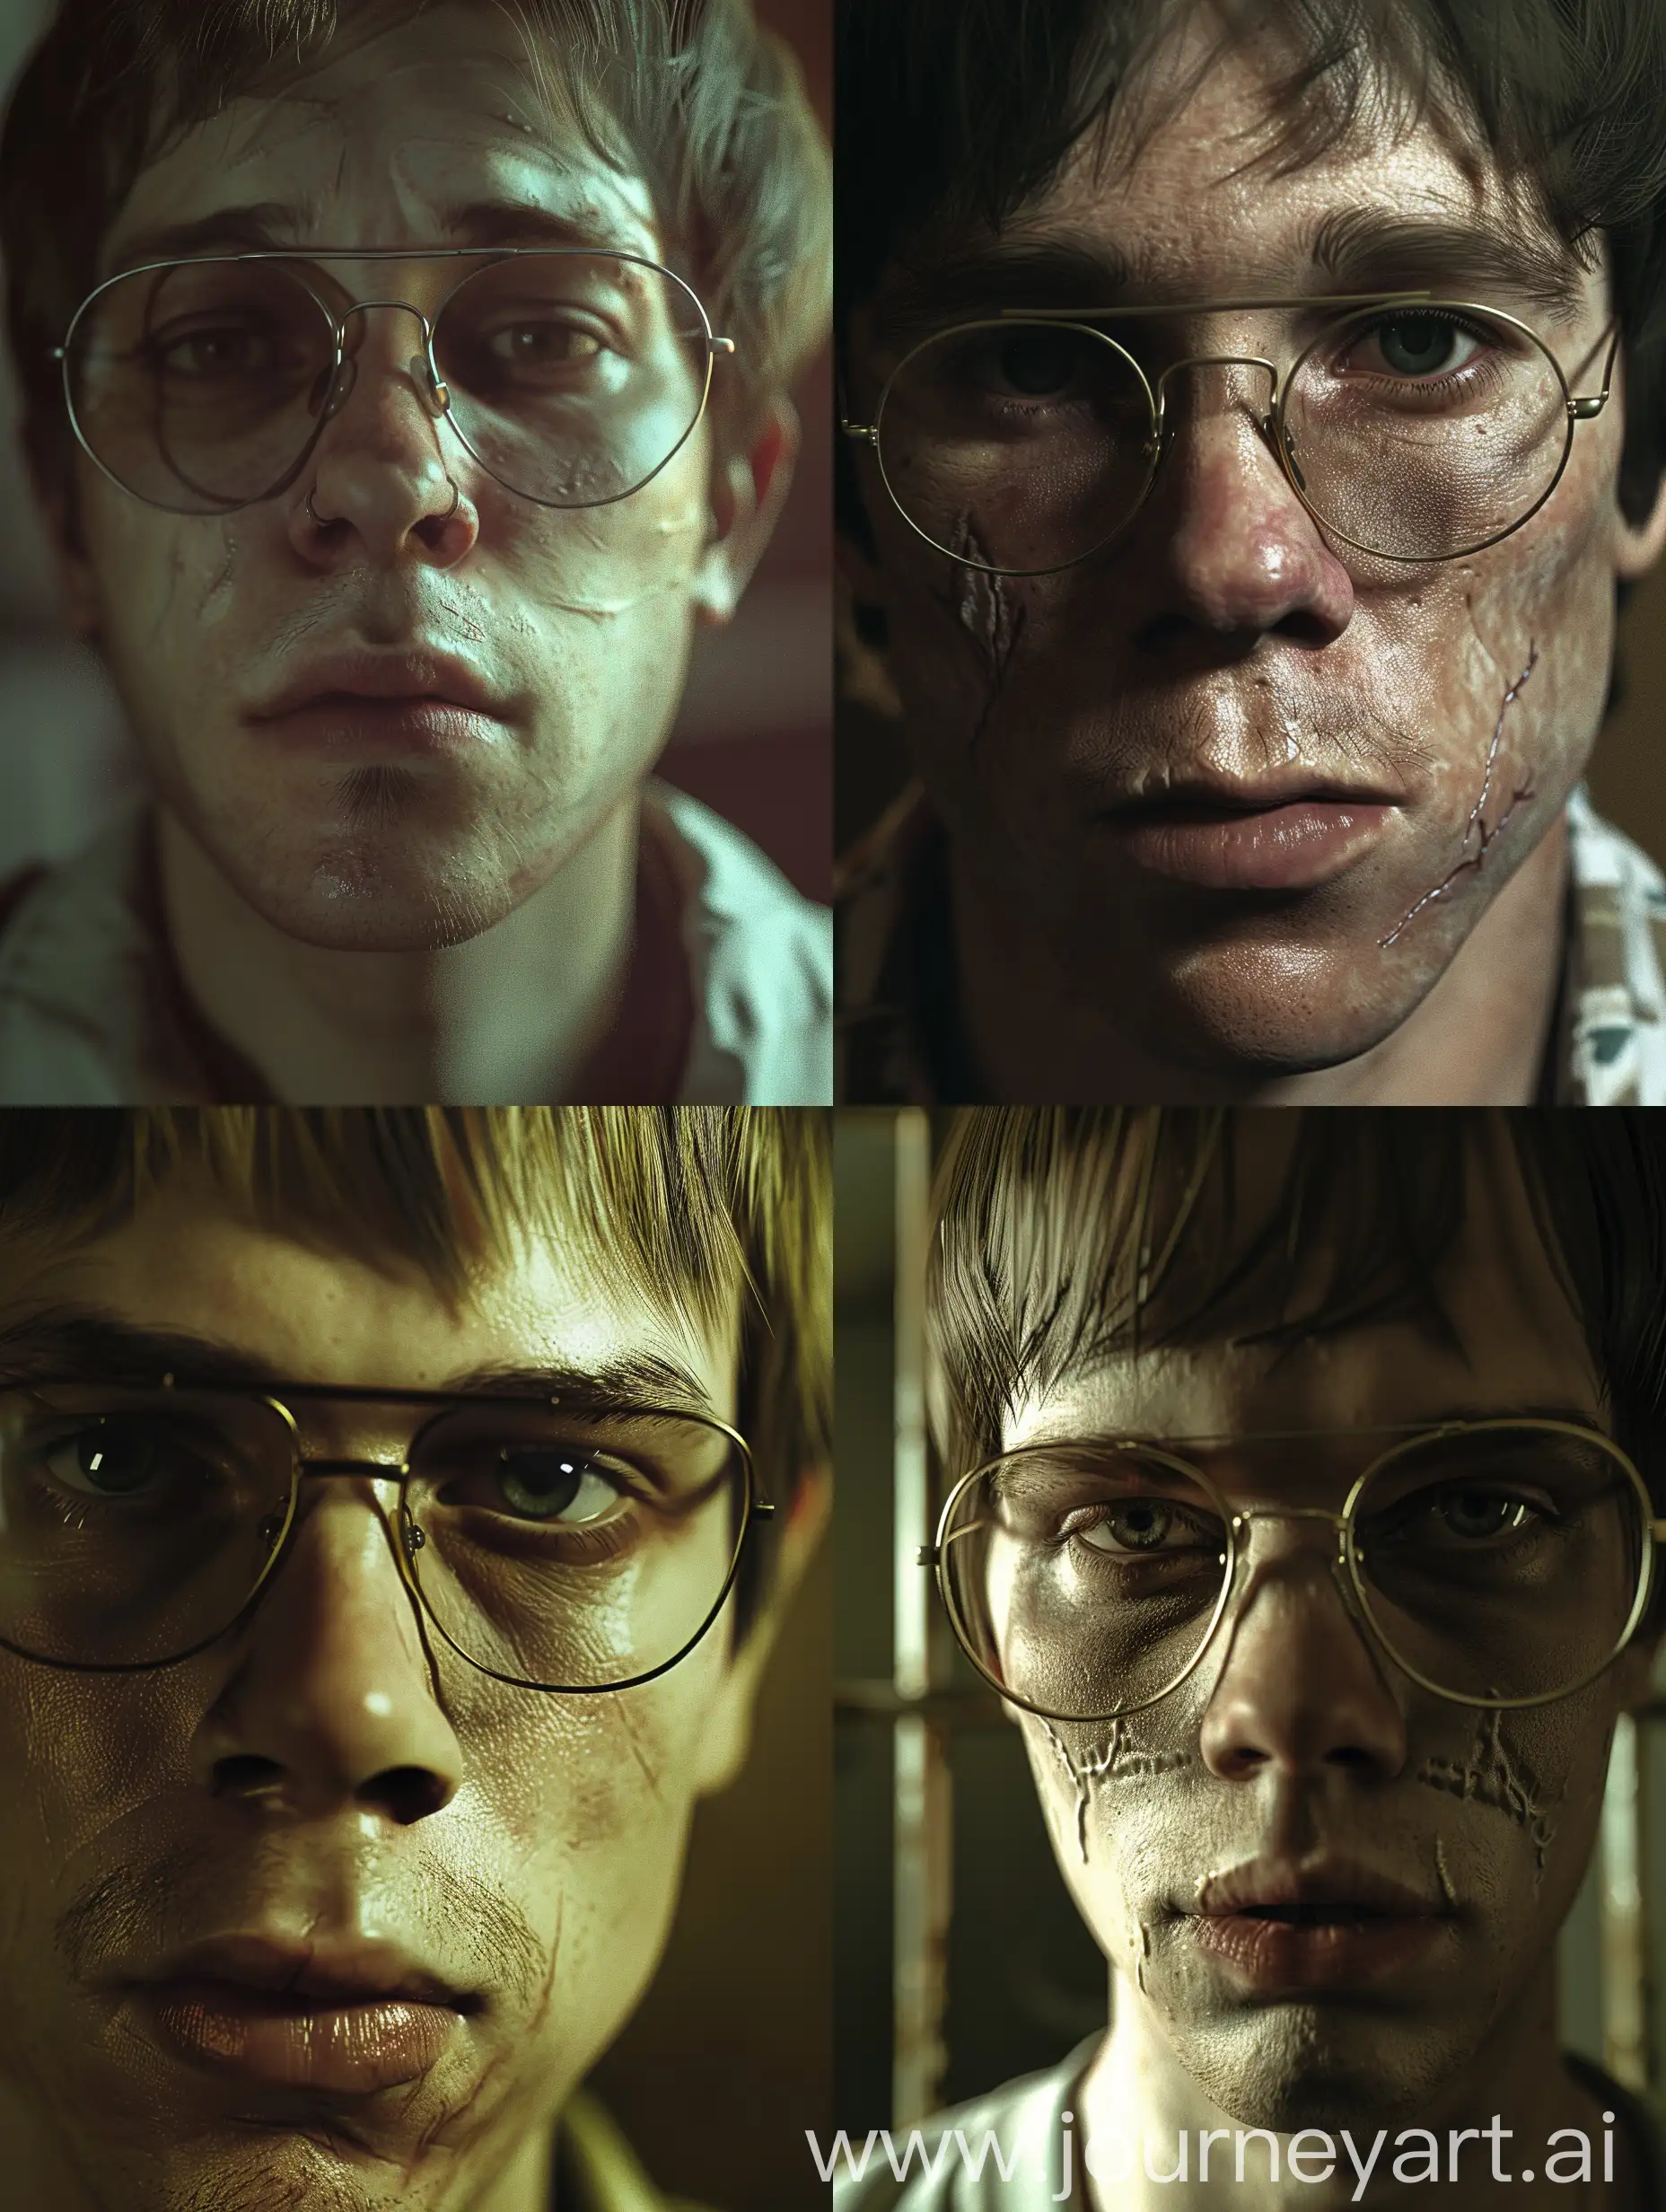 /imagine prompt: A photorealistic image of Jeffrey Dahmer, close-up of his face, wearing glasses, neutral expression. Background is a blurred, indistinct scene. Soft lighting highlighting facial features. Created Using: Nikon camera, high-definition, soft focus, realistic texture, natural lighting, shallow depth of field, portrait mode, detailed realism --v 6.0